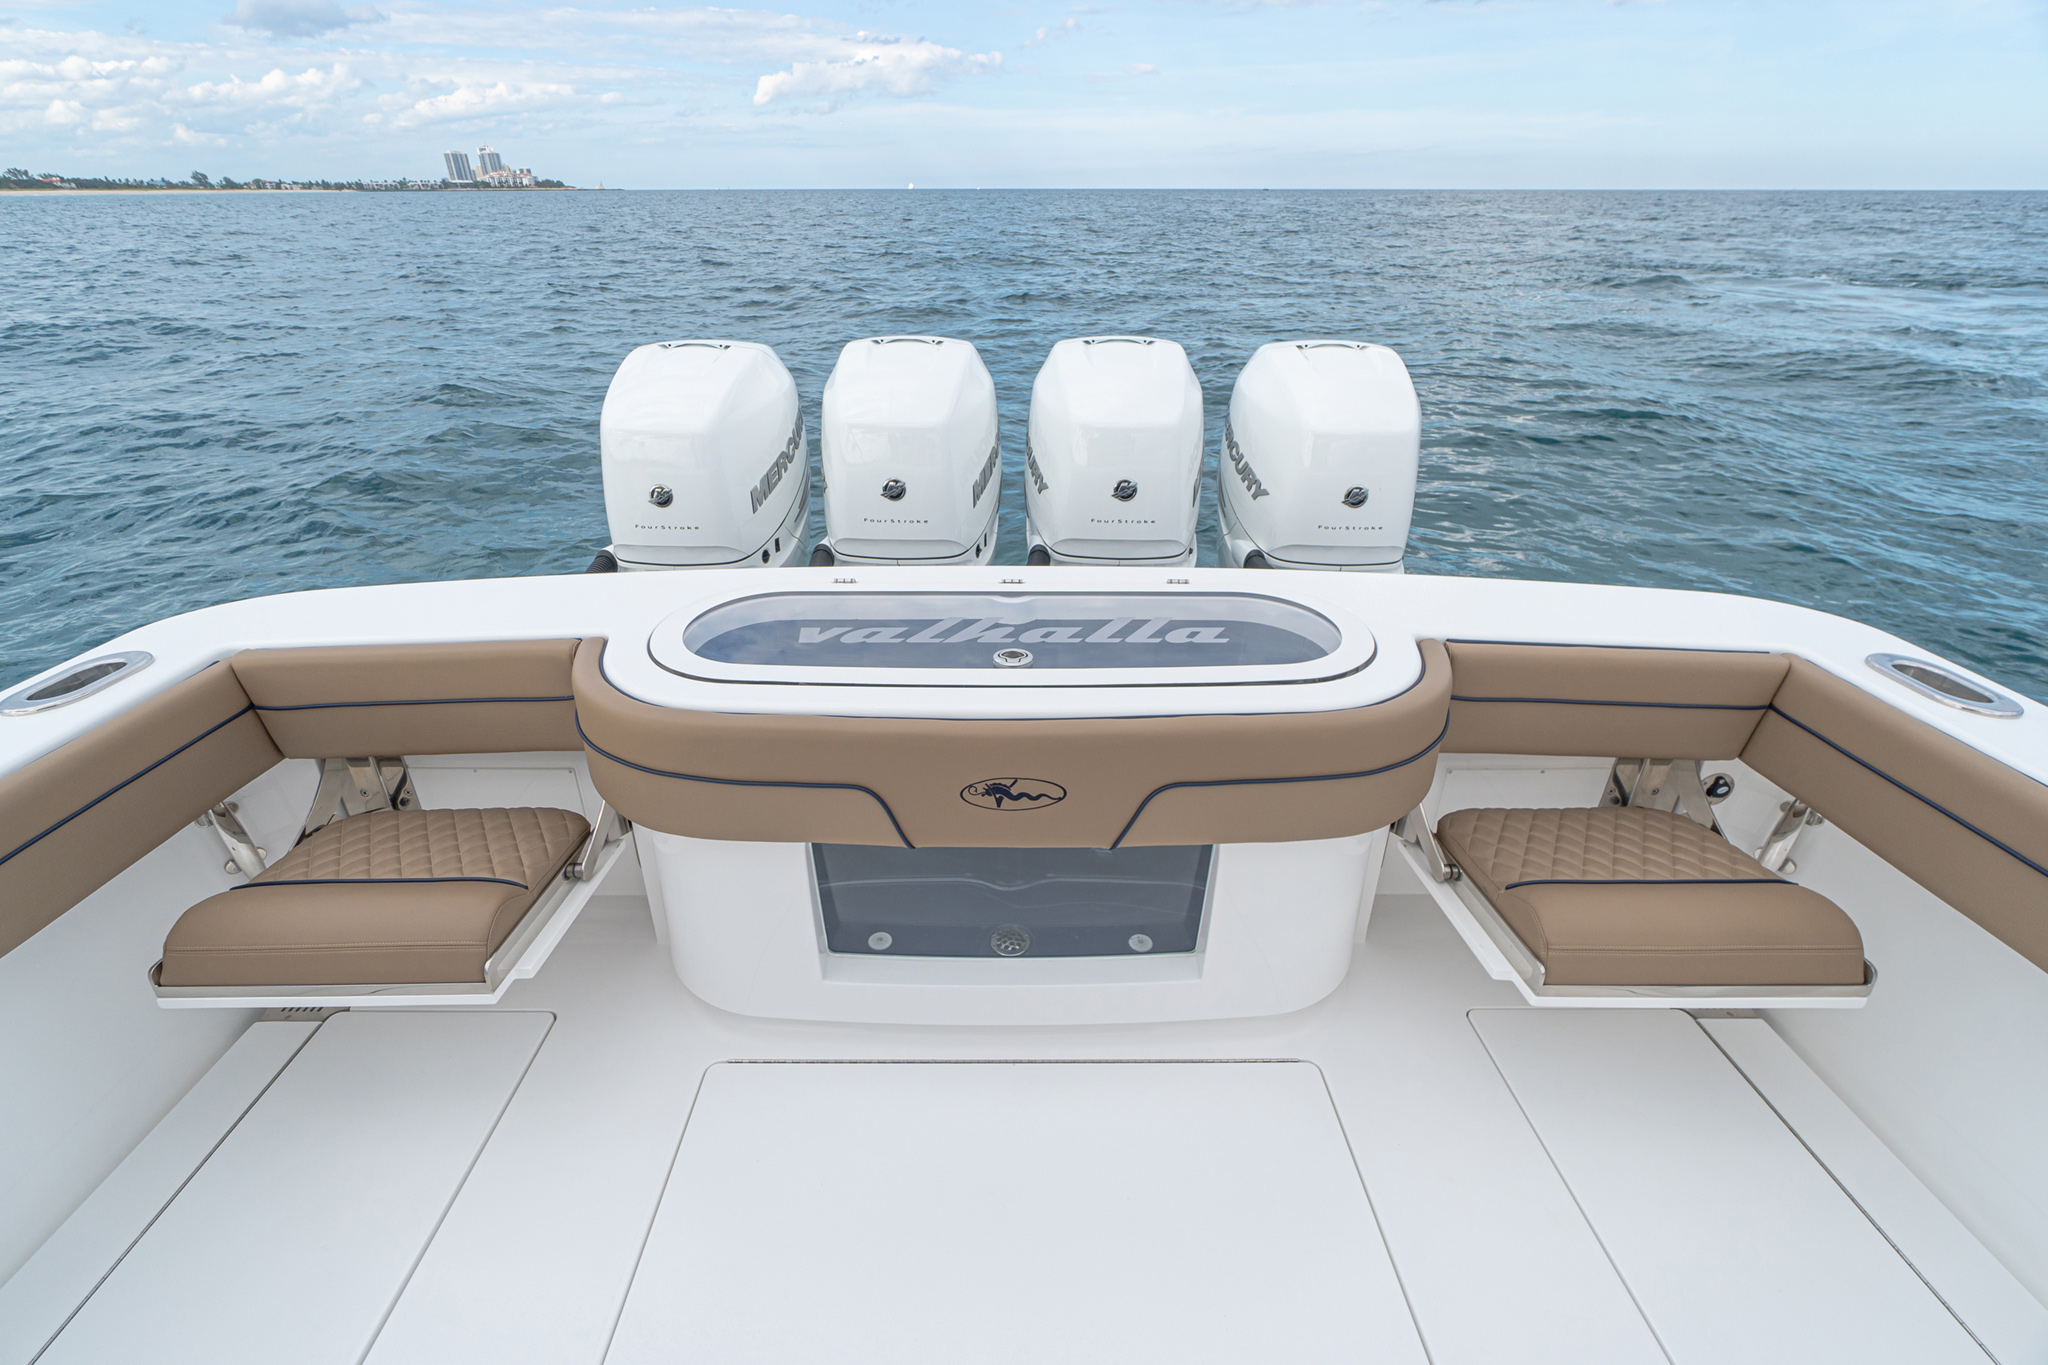 Fish/cruise flexibility with GG Schmitt transom seats, clear lid and front window on transom live well.